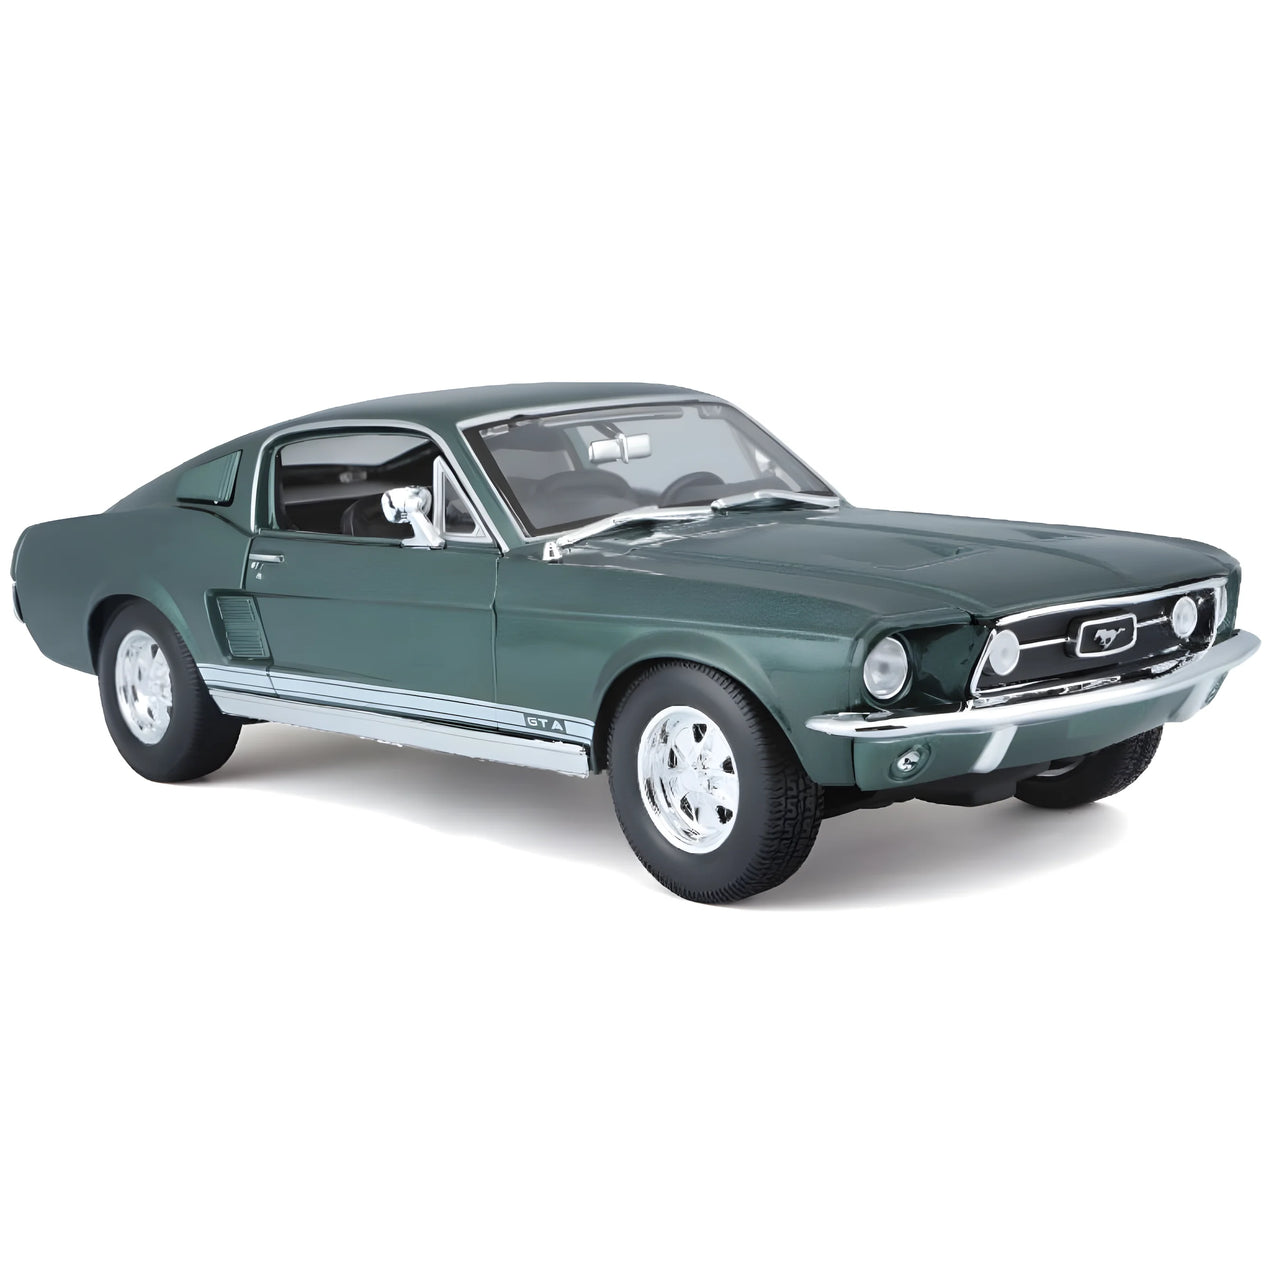 31166MDGR Auto Ford Mustang Gta Fastback Año 1967 Escala 1:18